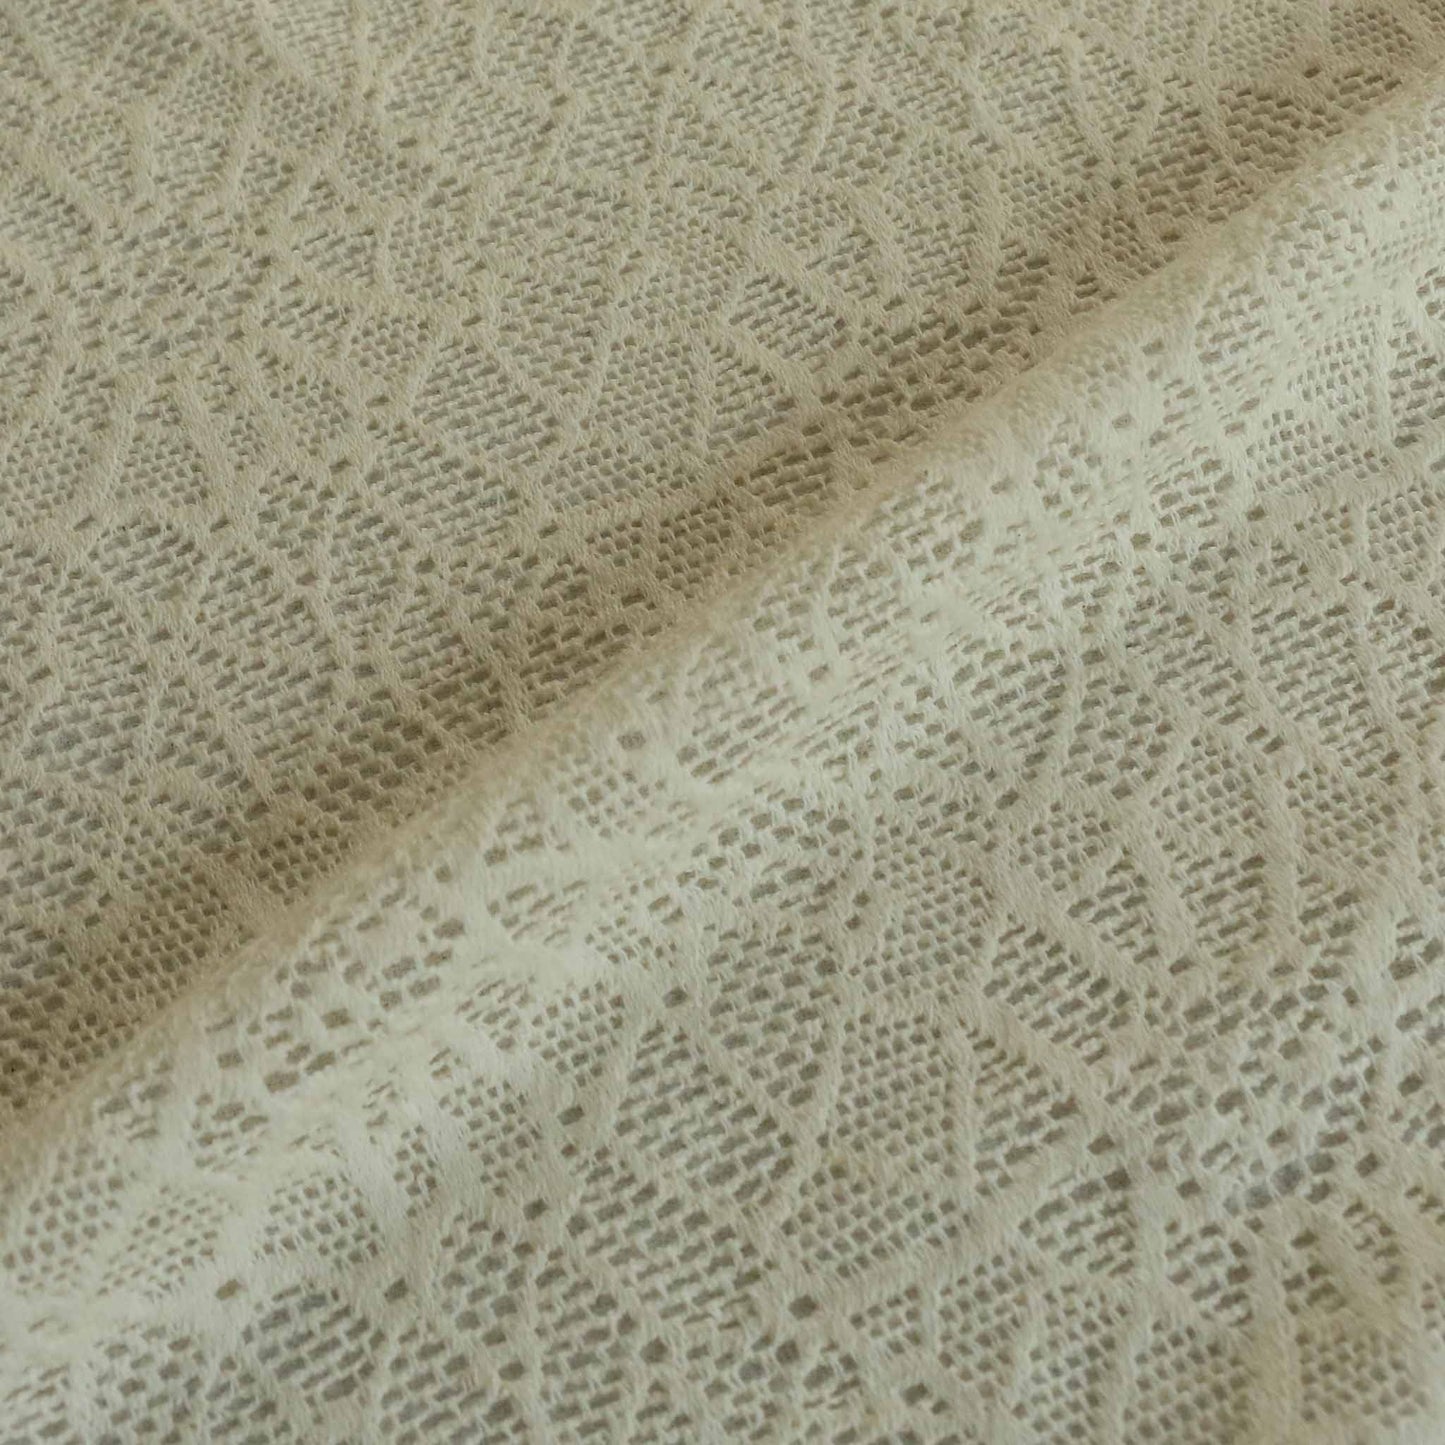 embroidery lace dressmaking fabric in cream colour